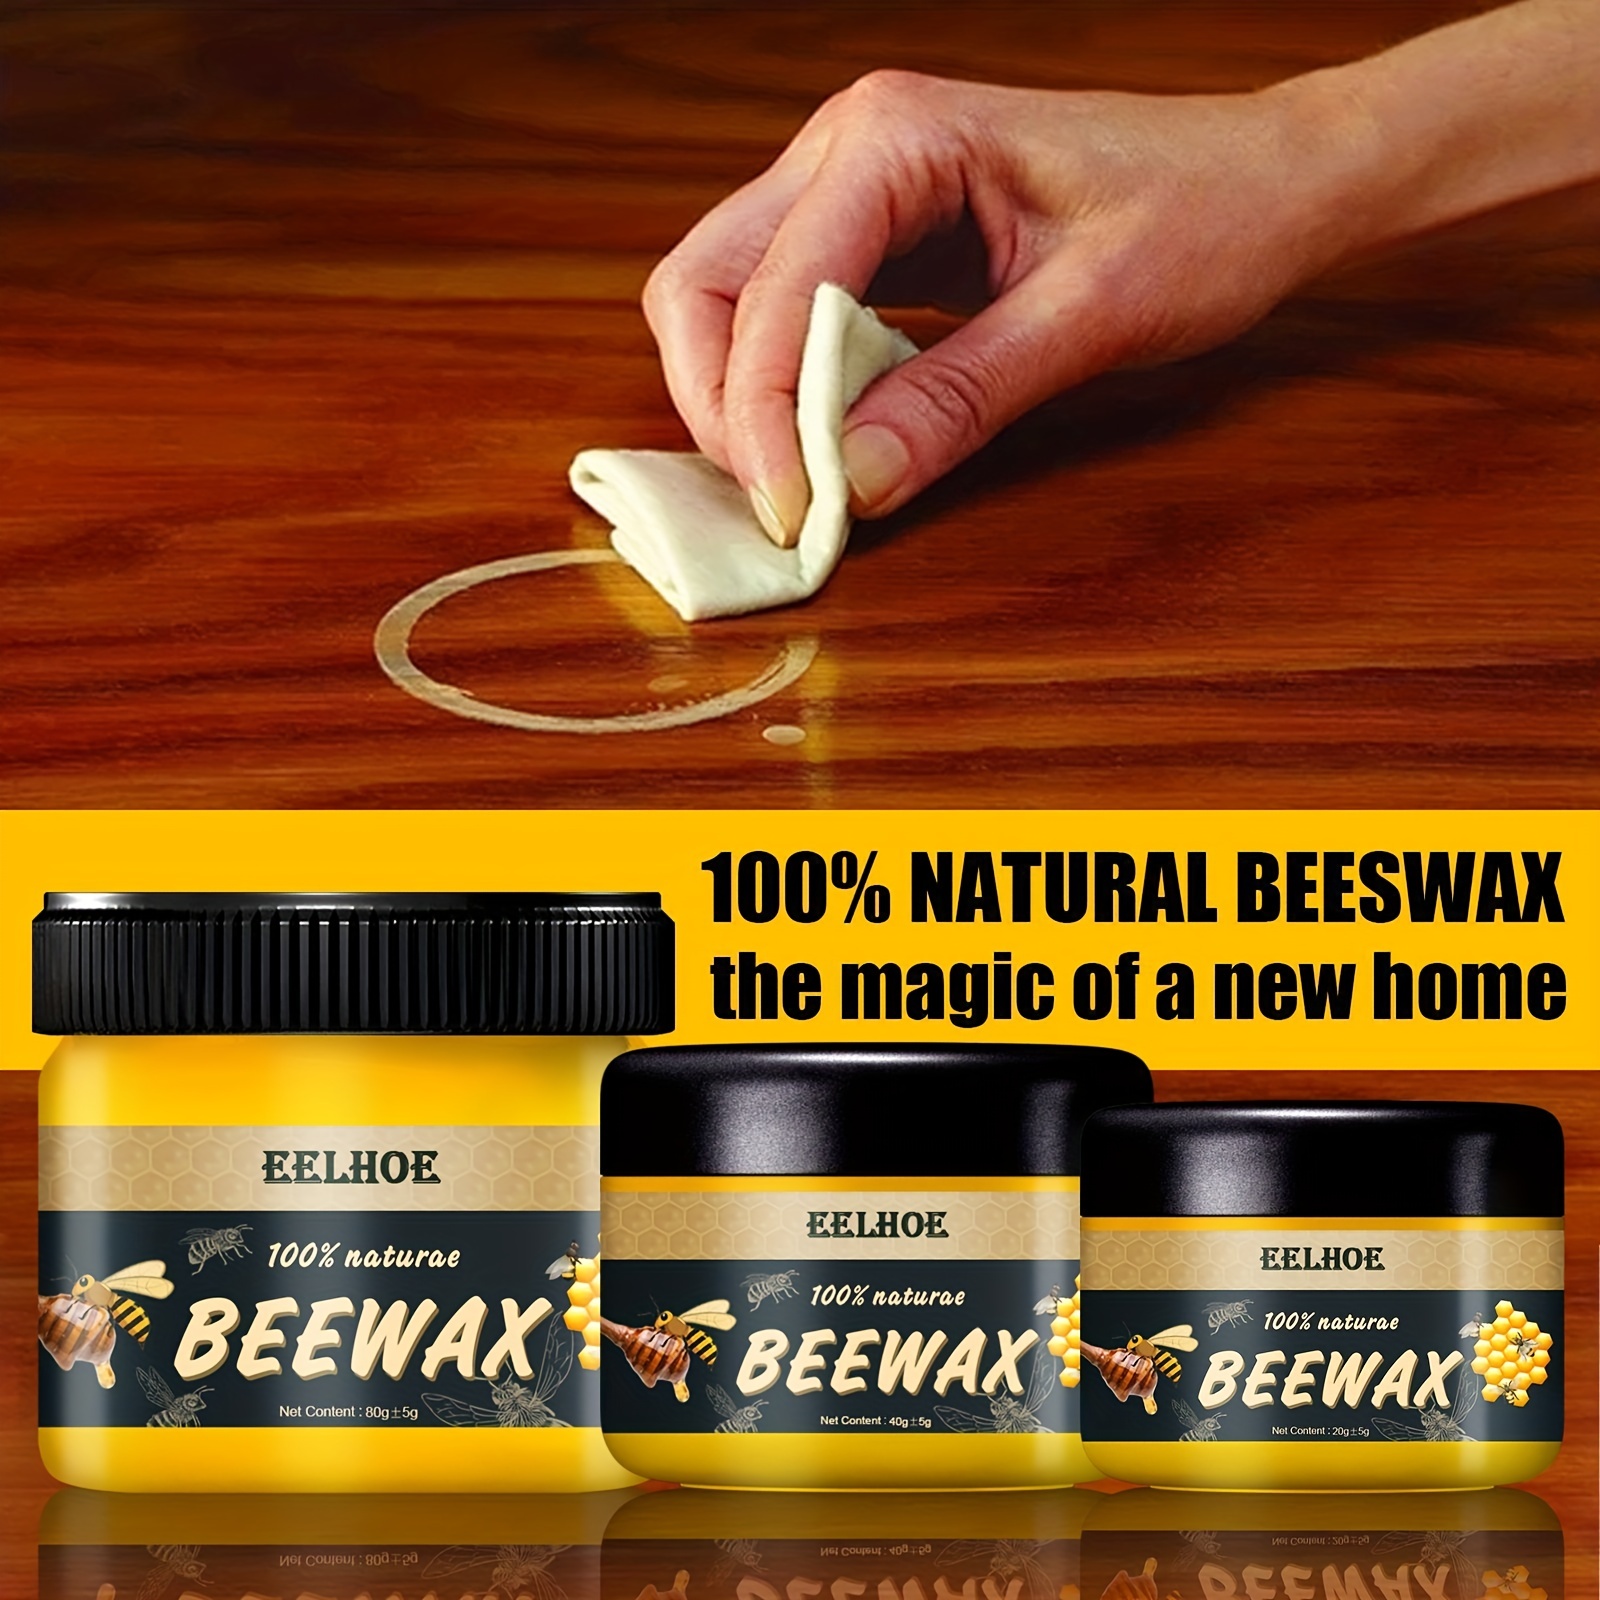 AKARZ White Beeswax Pure Natural Cosmetic Grade Top Quality for